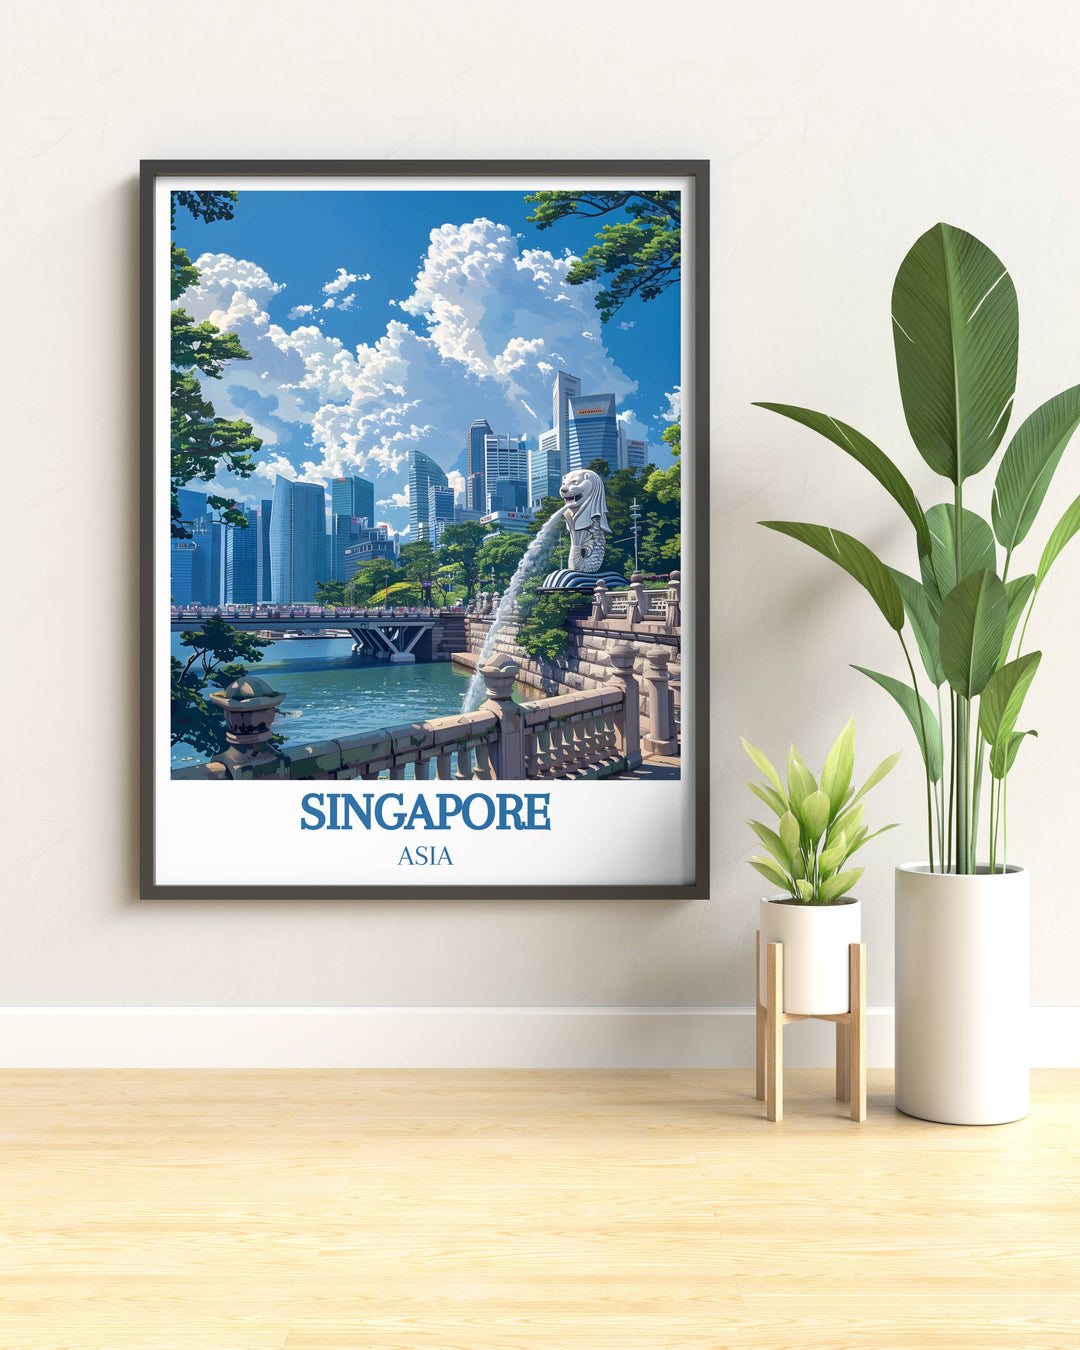 Elegant Singapore poster with a detailed depiction of the Merlion, great for a Southeast Asia-themed room